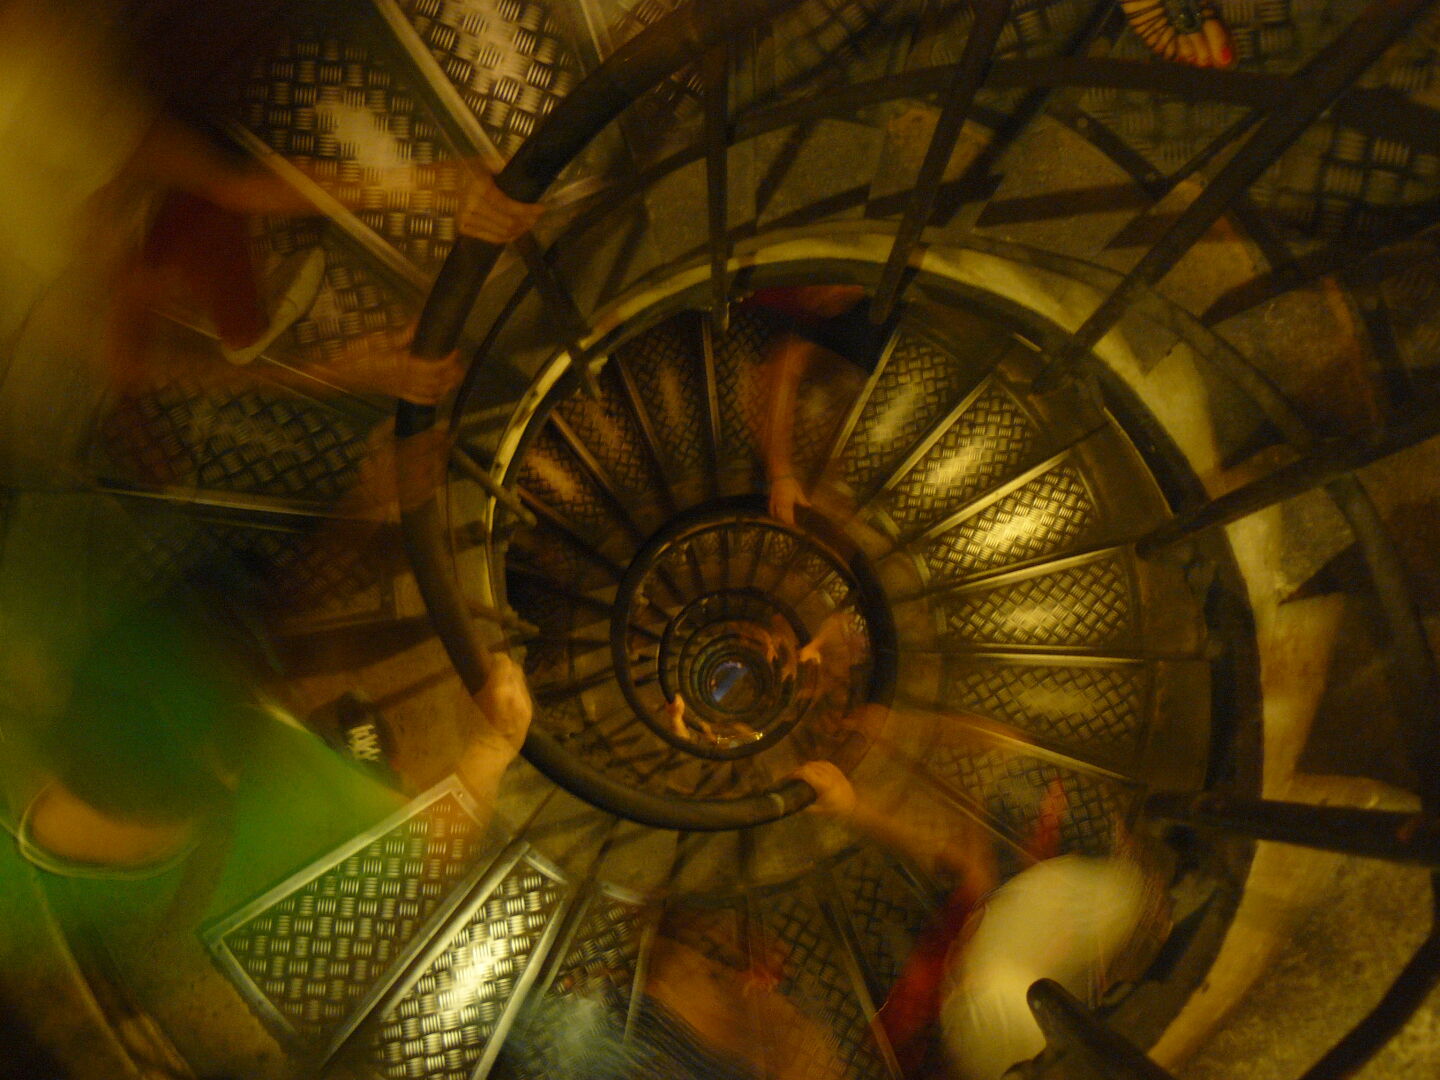 Spiral staircase inside the Arc de Triomphe.